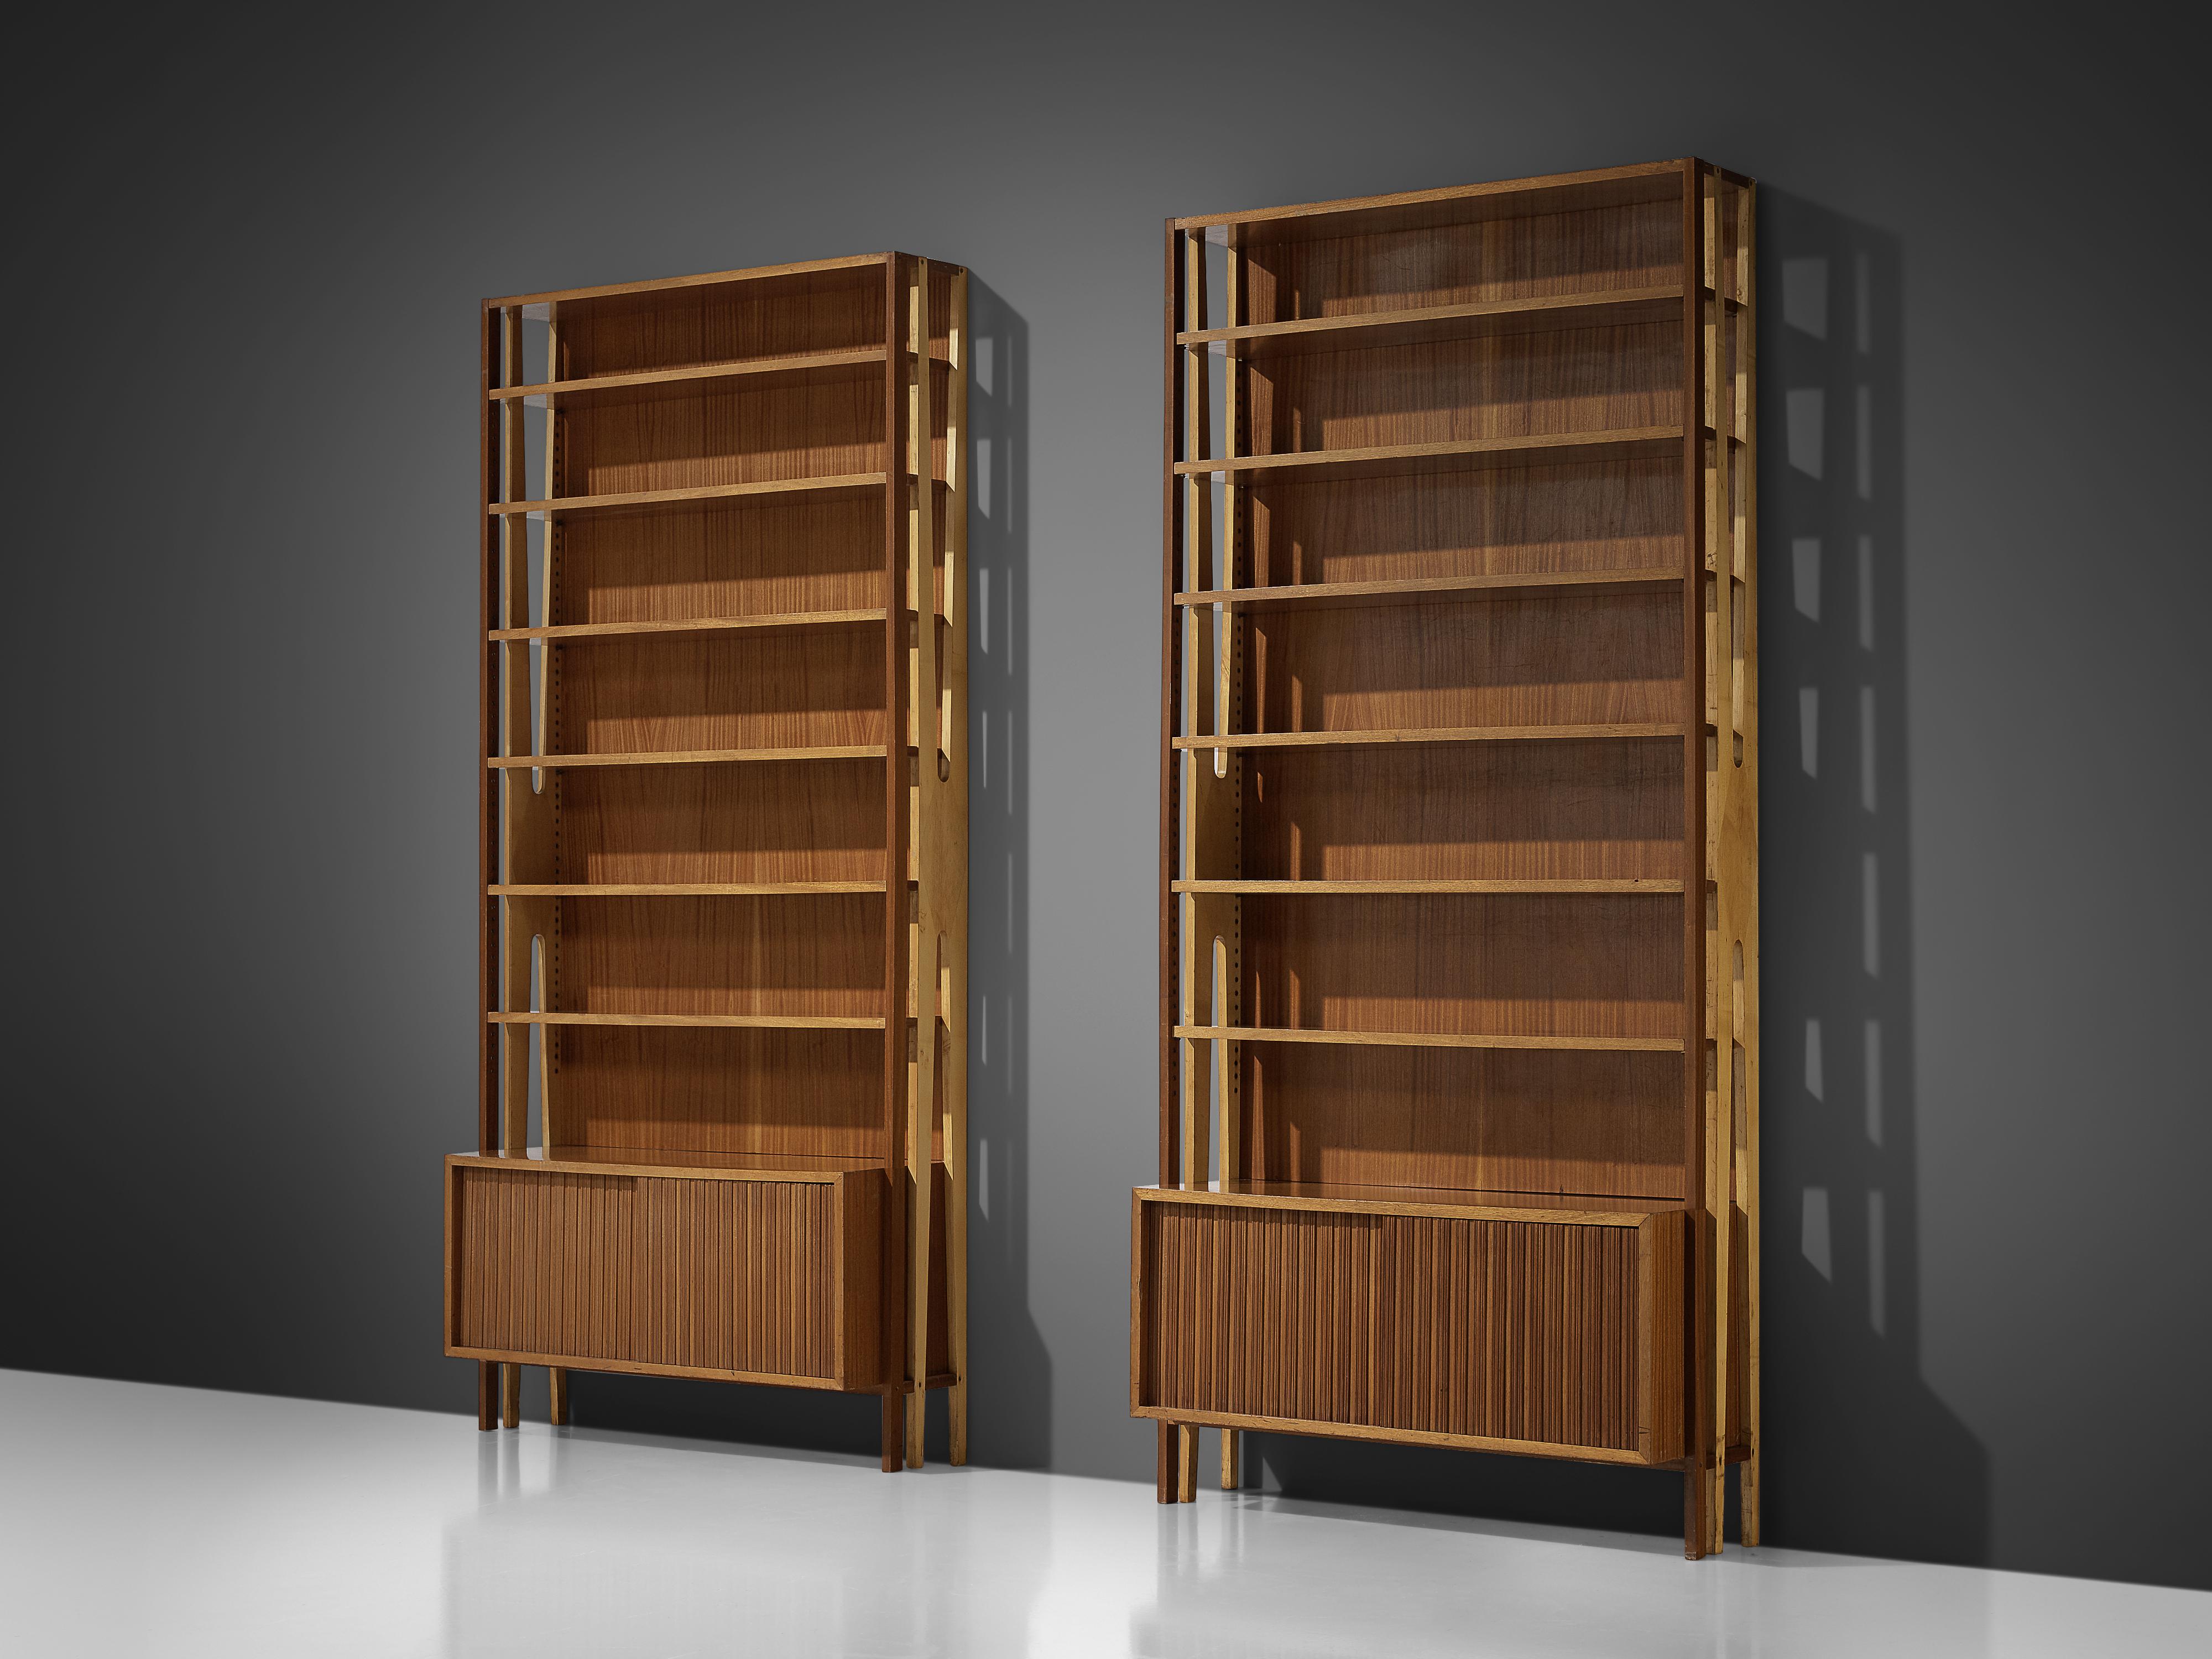 Two monumental bookcases, mahogany, Italy, 1960s

Large imposing bookcases, executed in refined mahogany. Both cases feature a large amount of shelves and storage compartments with sliding doors, making them very functional. The two bookcases can be